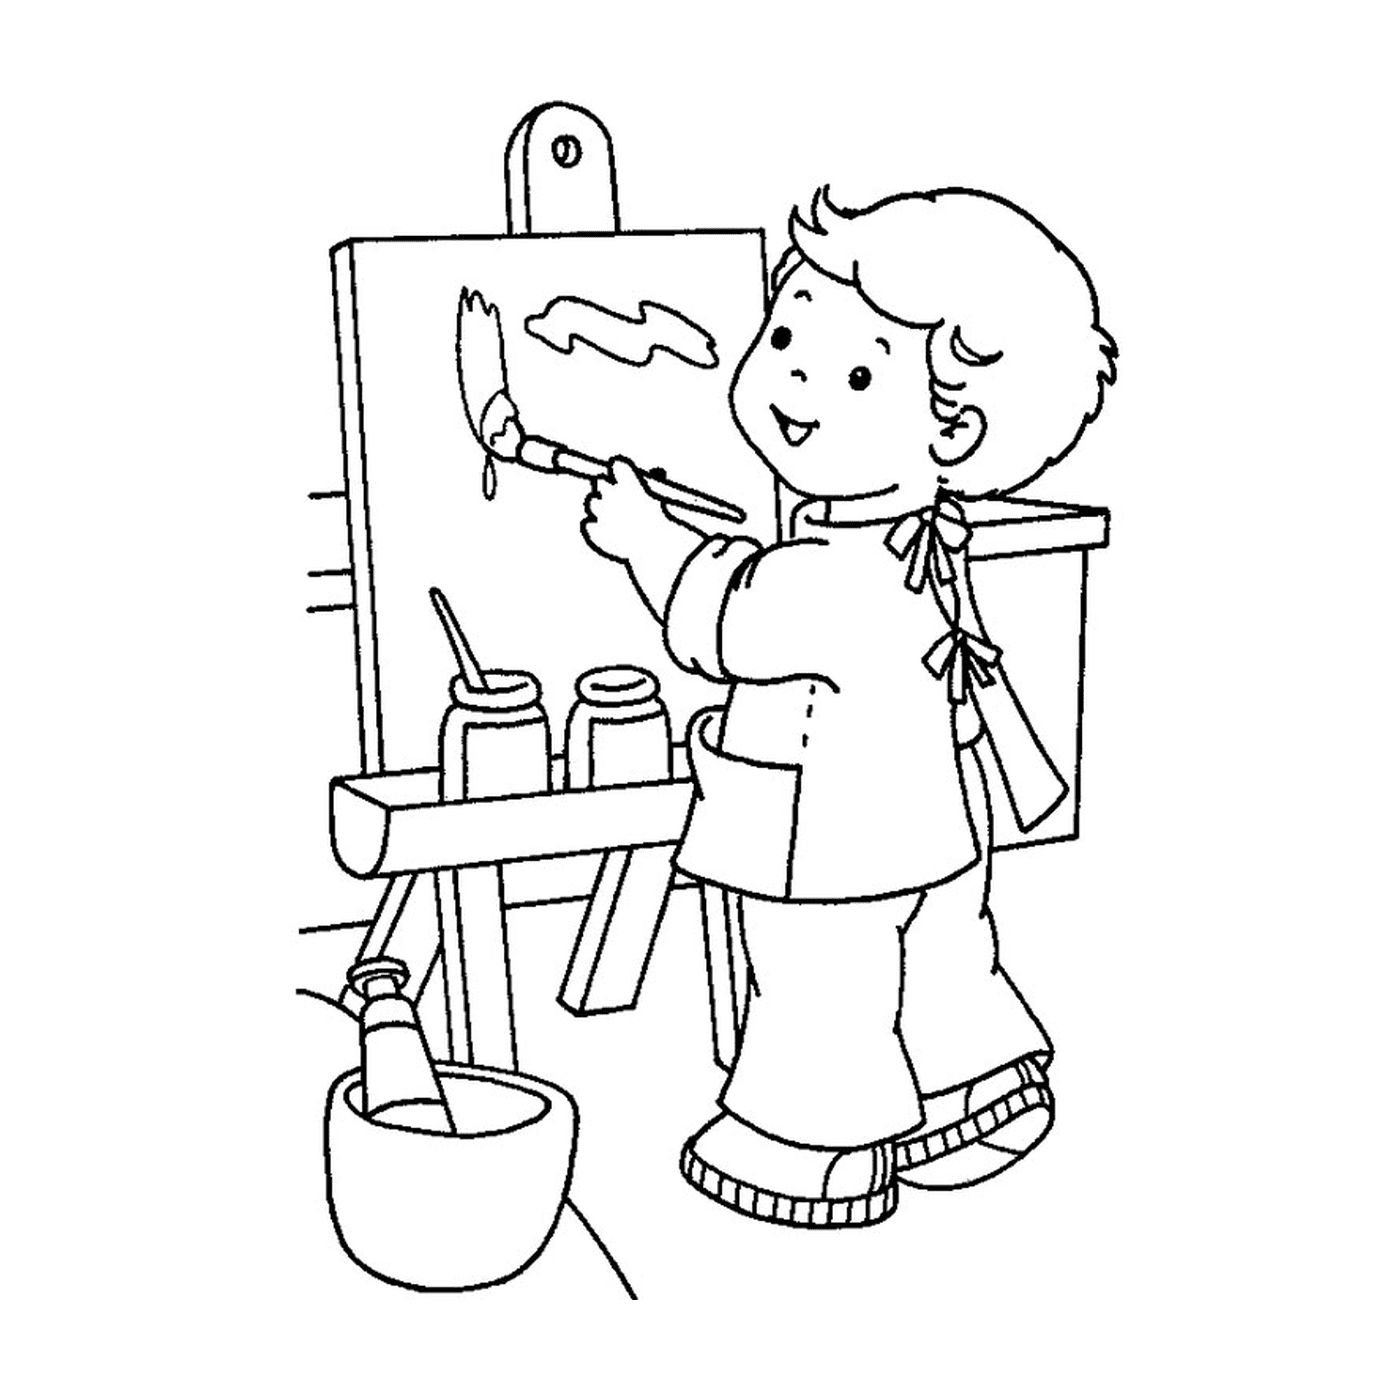  Boy painting on a easel 